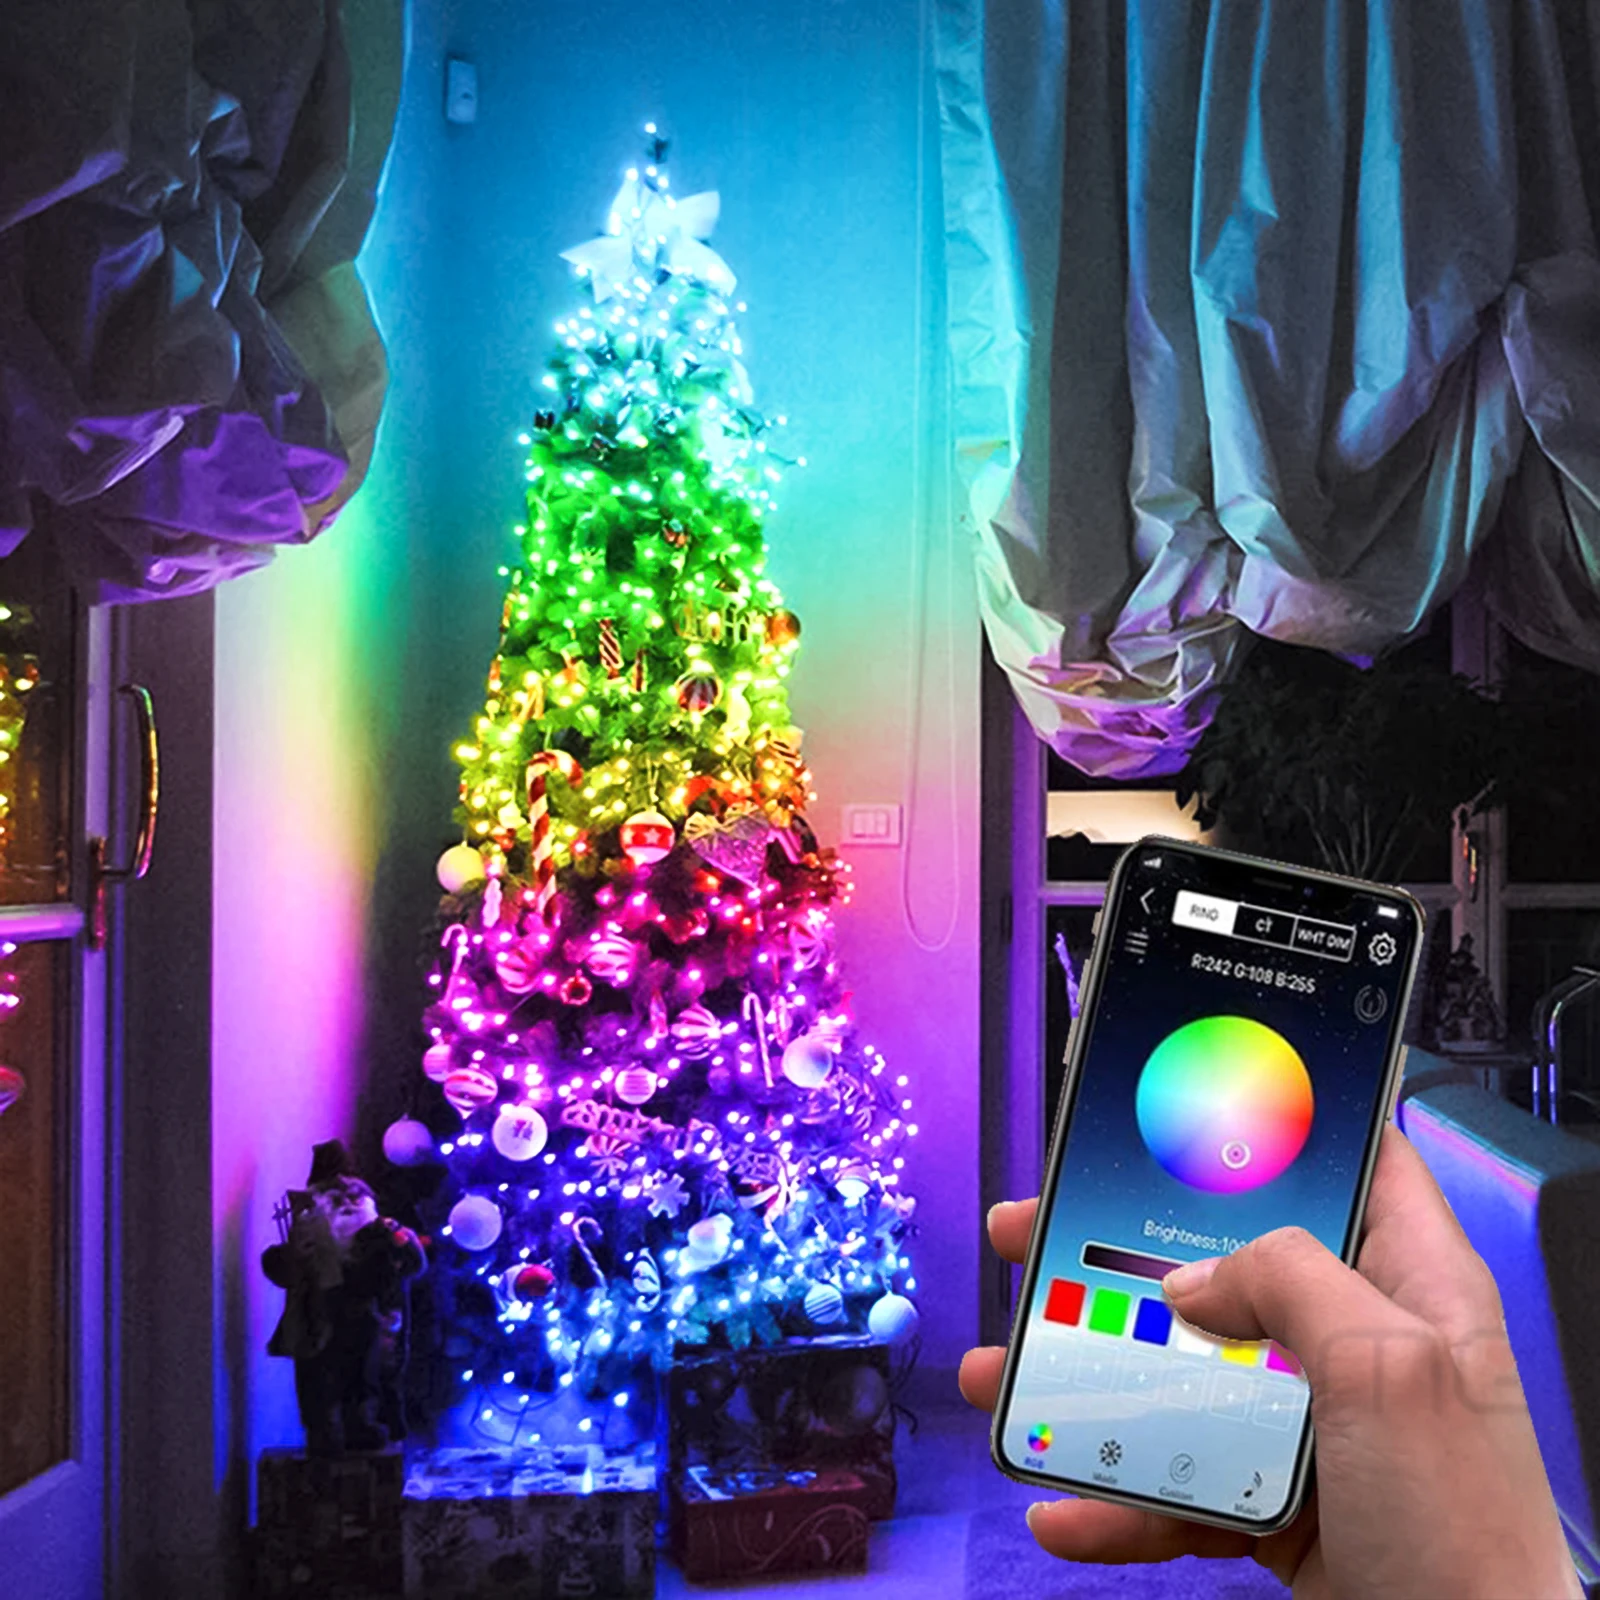 Placeret Tilslutte Skærm Christmas Tree Decor Led String Lights Bluetooth USB Control Merry Xmas For  Home navidad Noel Gifts New Year 2022 Decoration|Pendant & Drop Ornaments|  - AliExpress